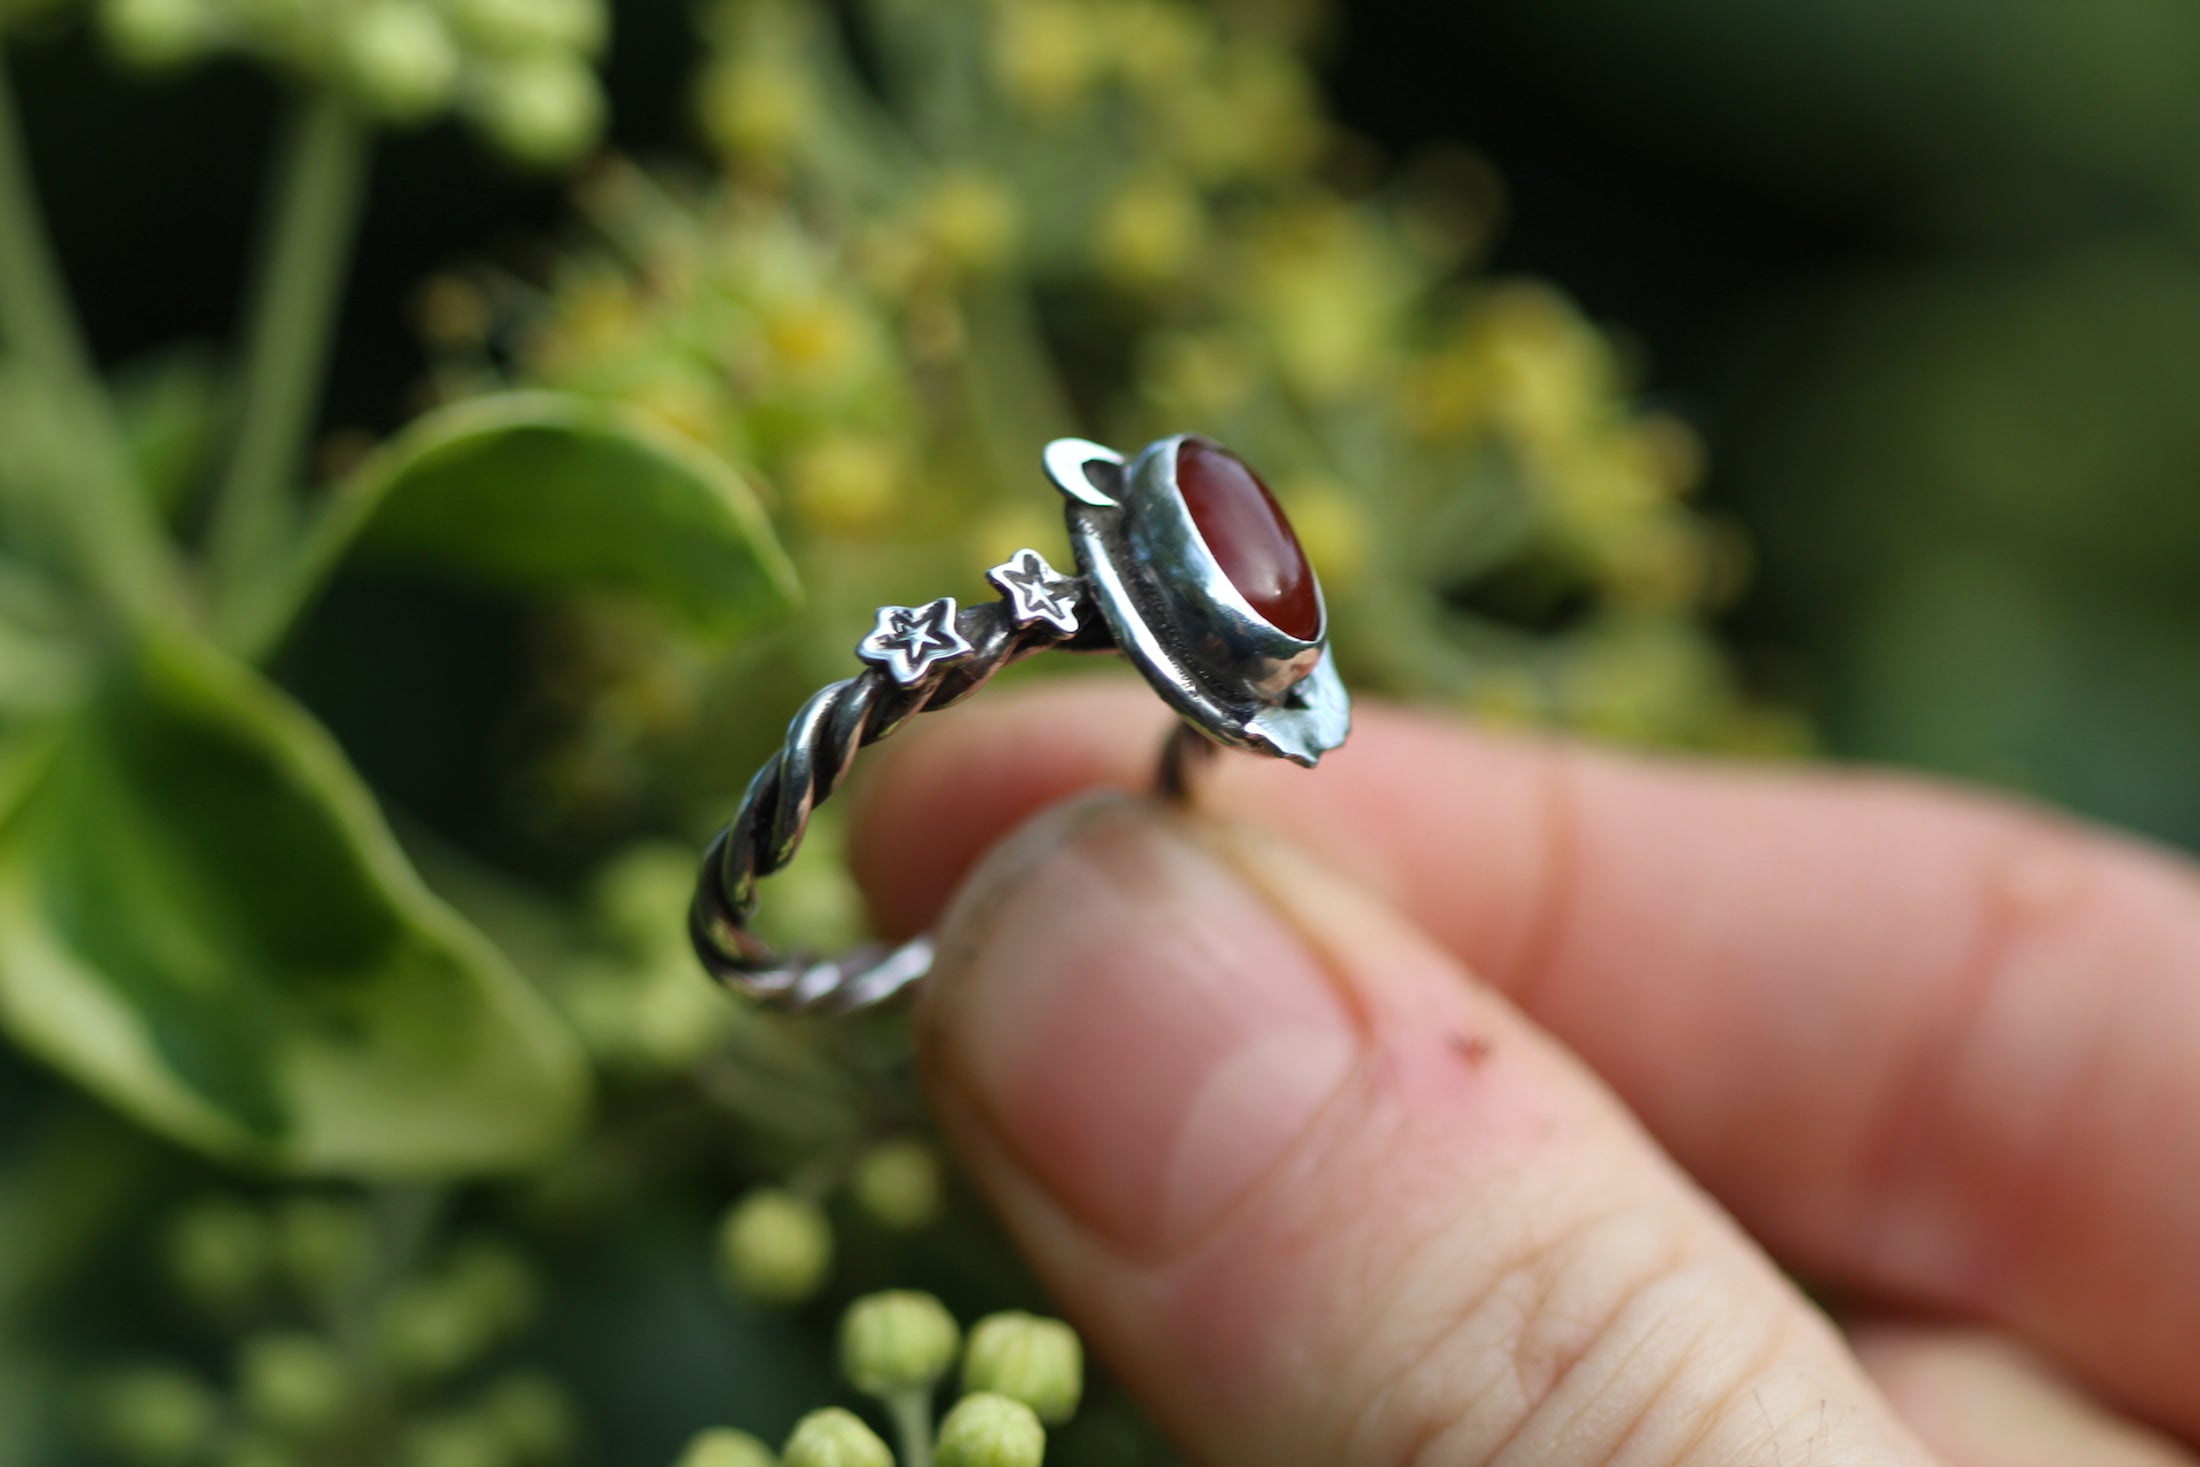 CHILDREN OF THE NIGHT Handmade Sterling Silver Ring with Carnelian - Size N/6.5